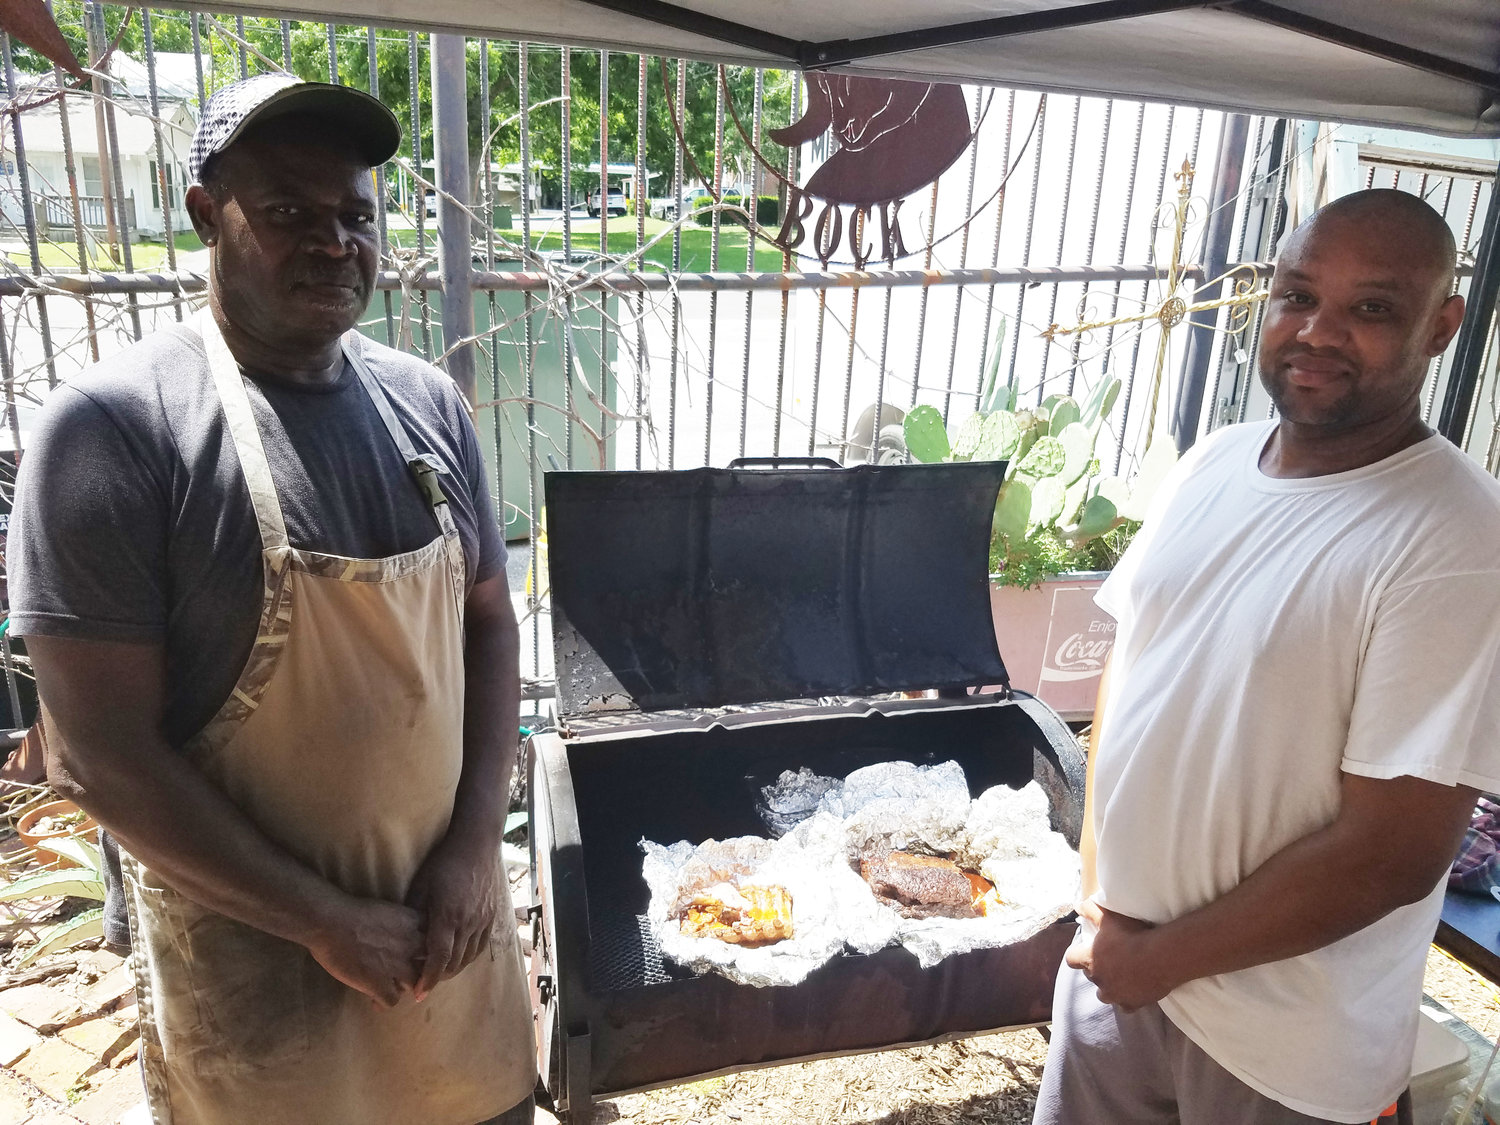 A&A Barbecue is an every-other-week fixture on the back patio of Antiques, Art and Beer. The duo of Alvin Brown and his son-in-law Anton Dews sets up shop every other Saturday serving their special barbecue.